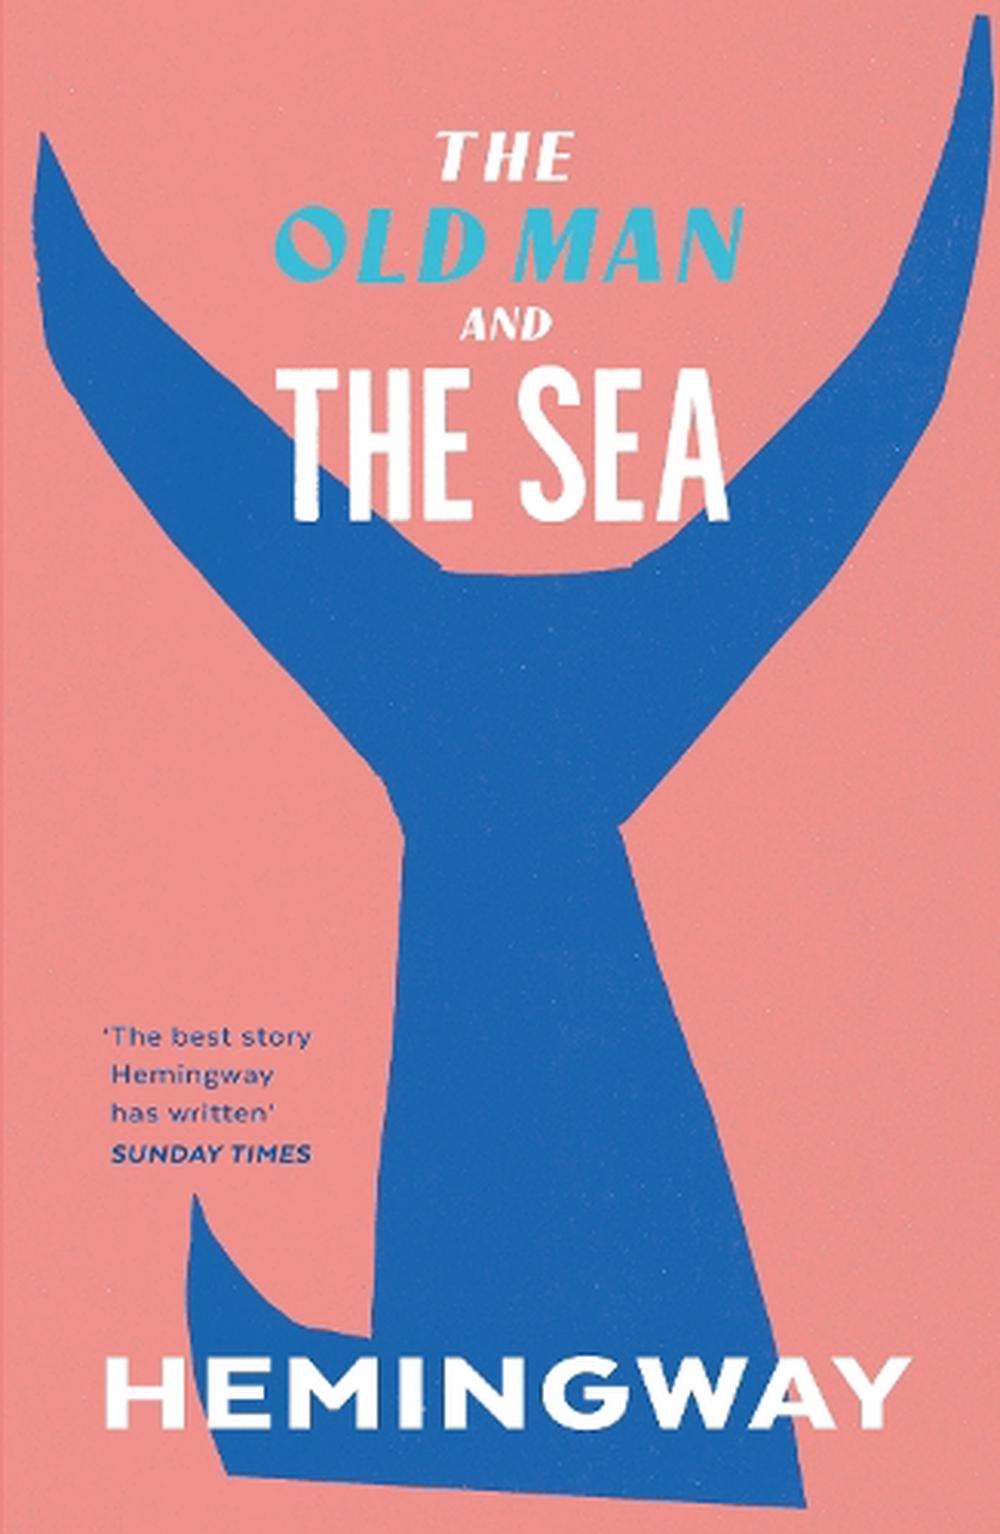 the old man and the sea book online